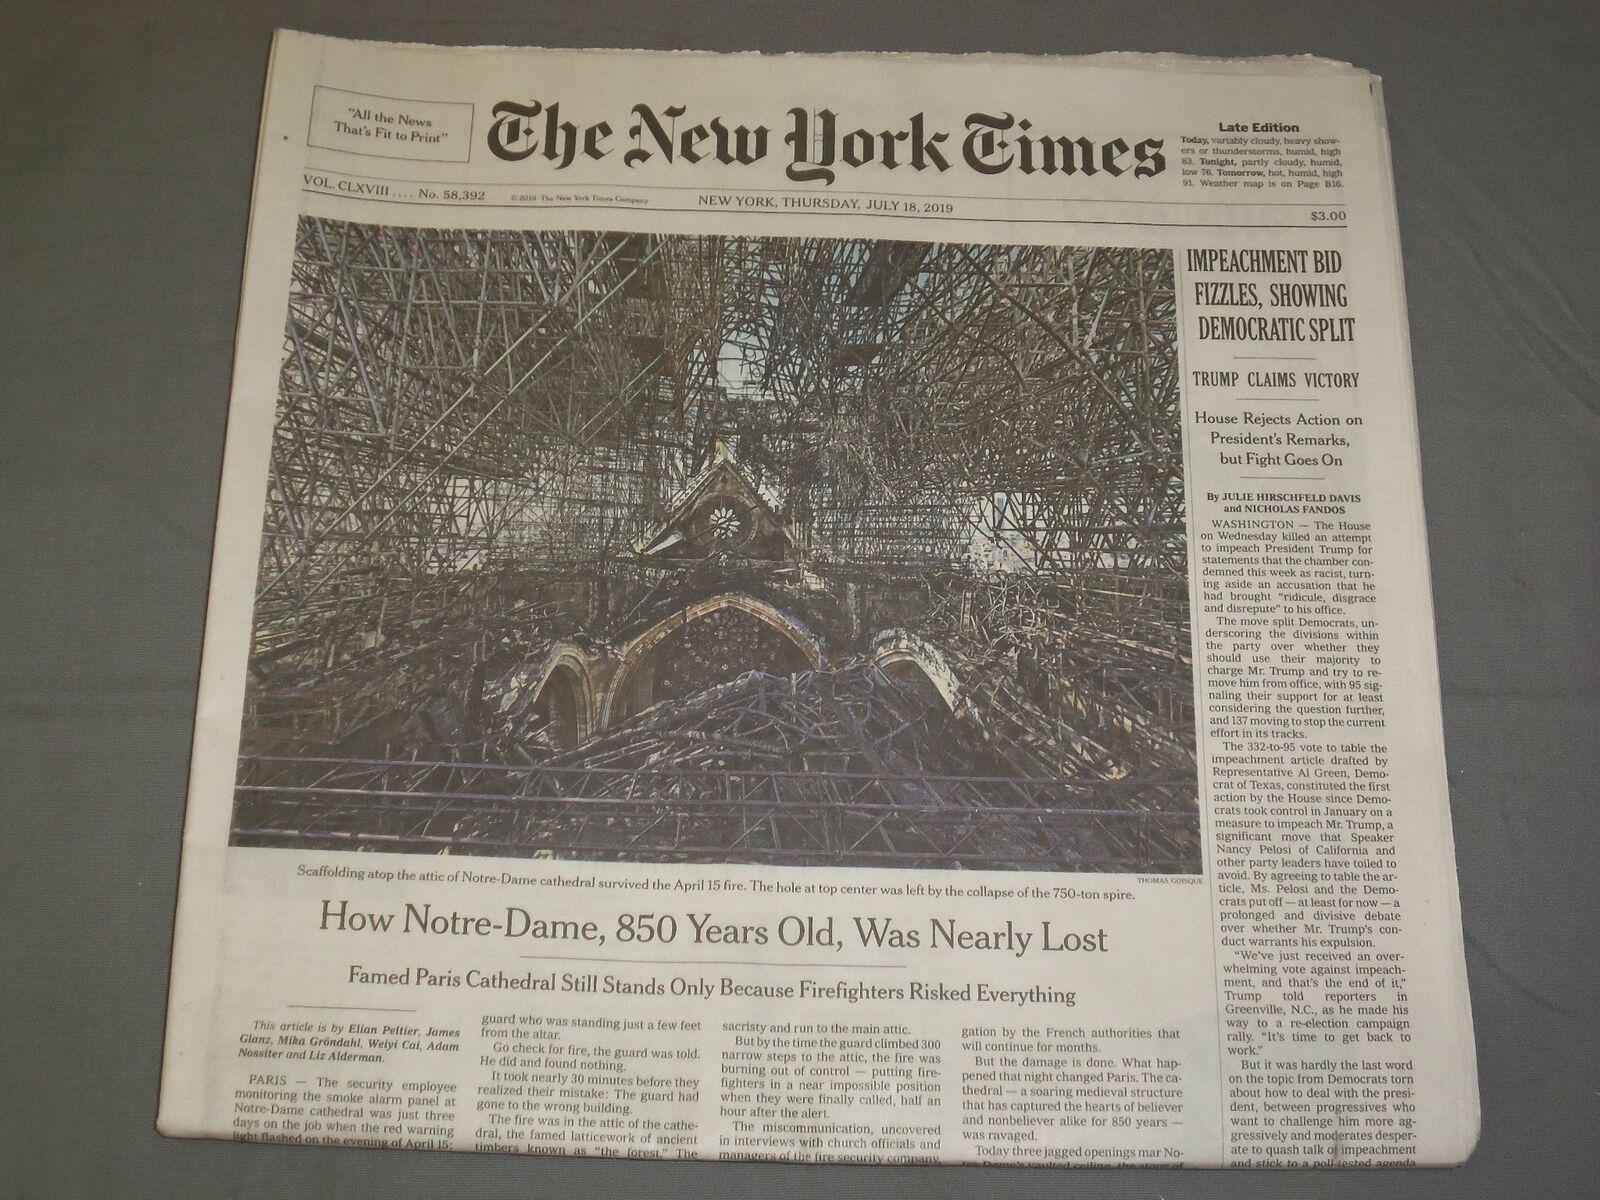 2019 JULY 18 NEW YORK TIMES - HOW NOTRE-DAME, 850 YEARS OLD, WAS NEARLY LOST